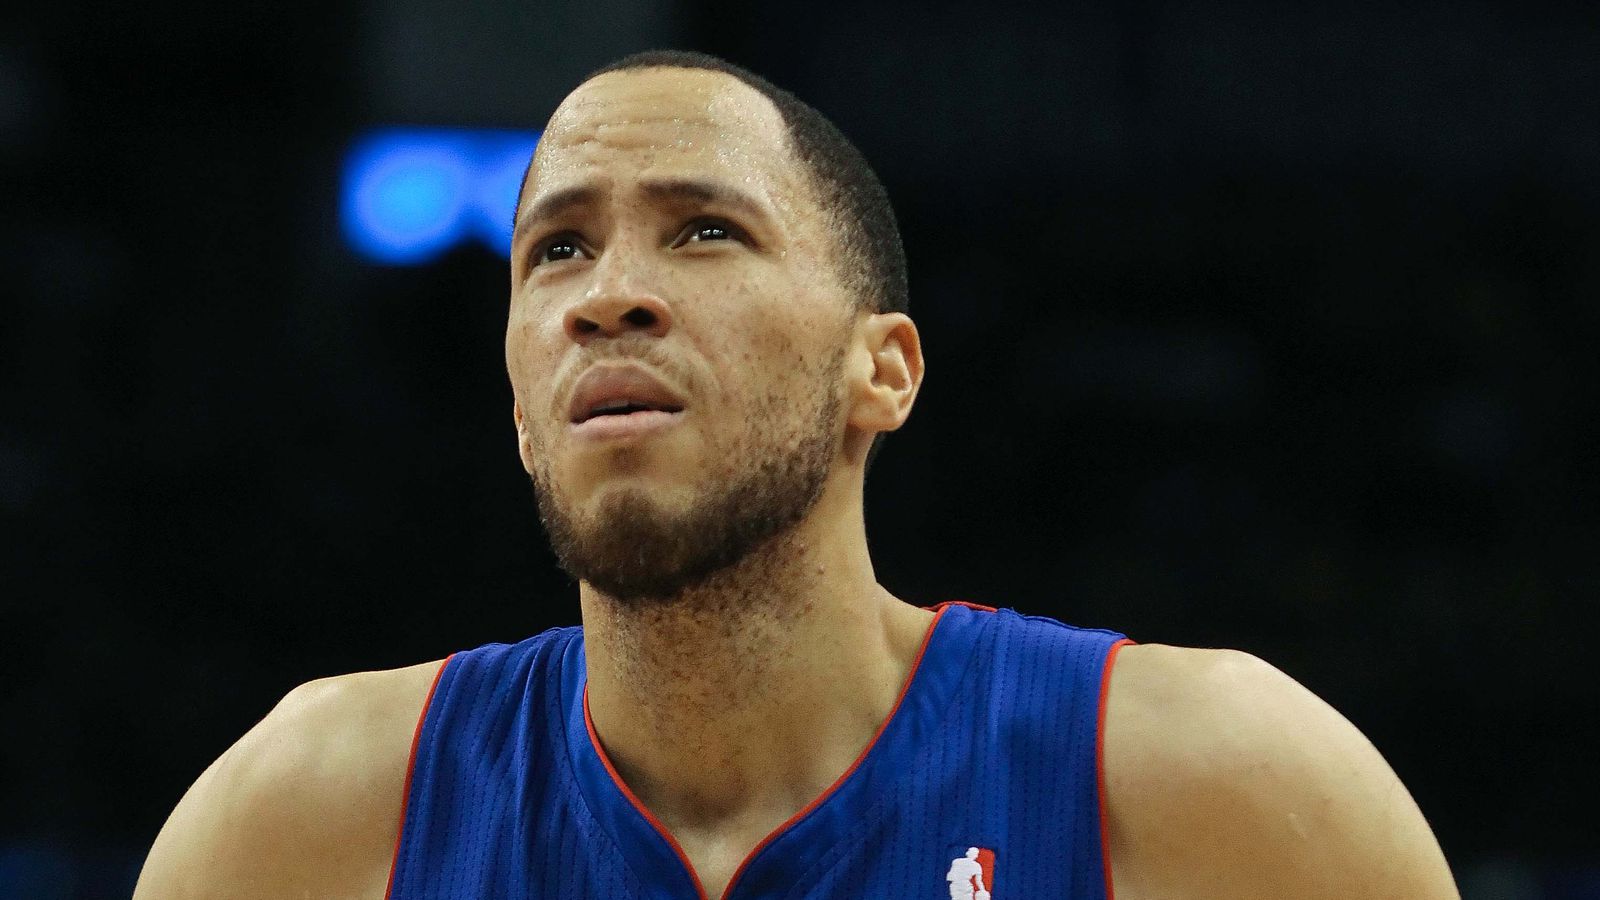 Tayshaun Prince wasn't exactly happy about trade, was expecting buyout